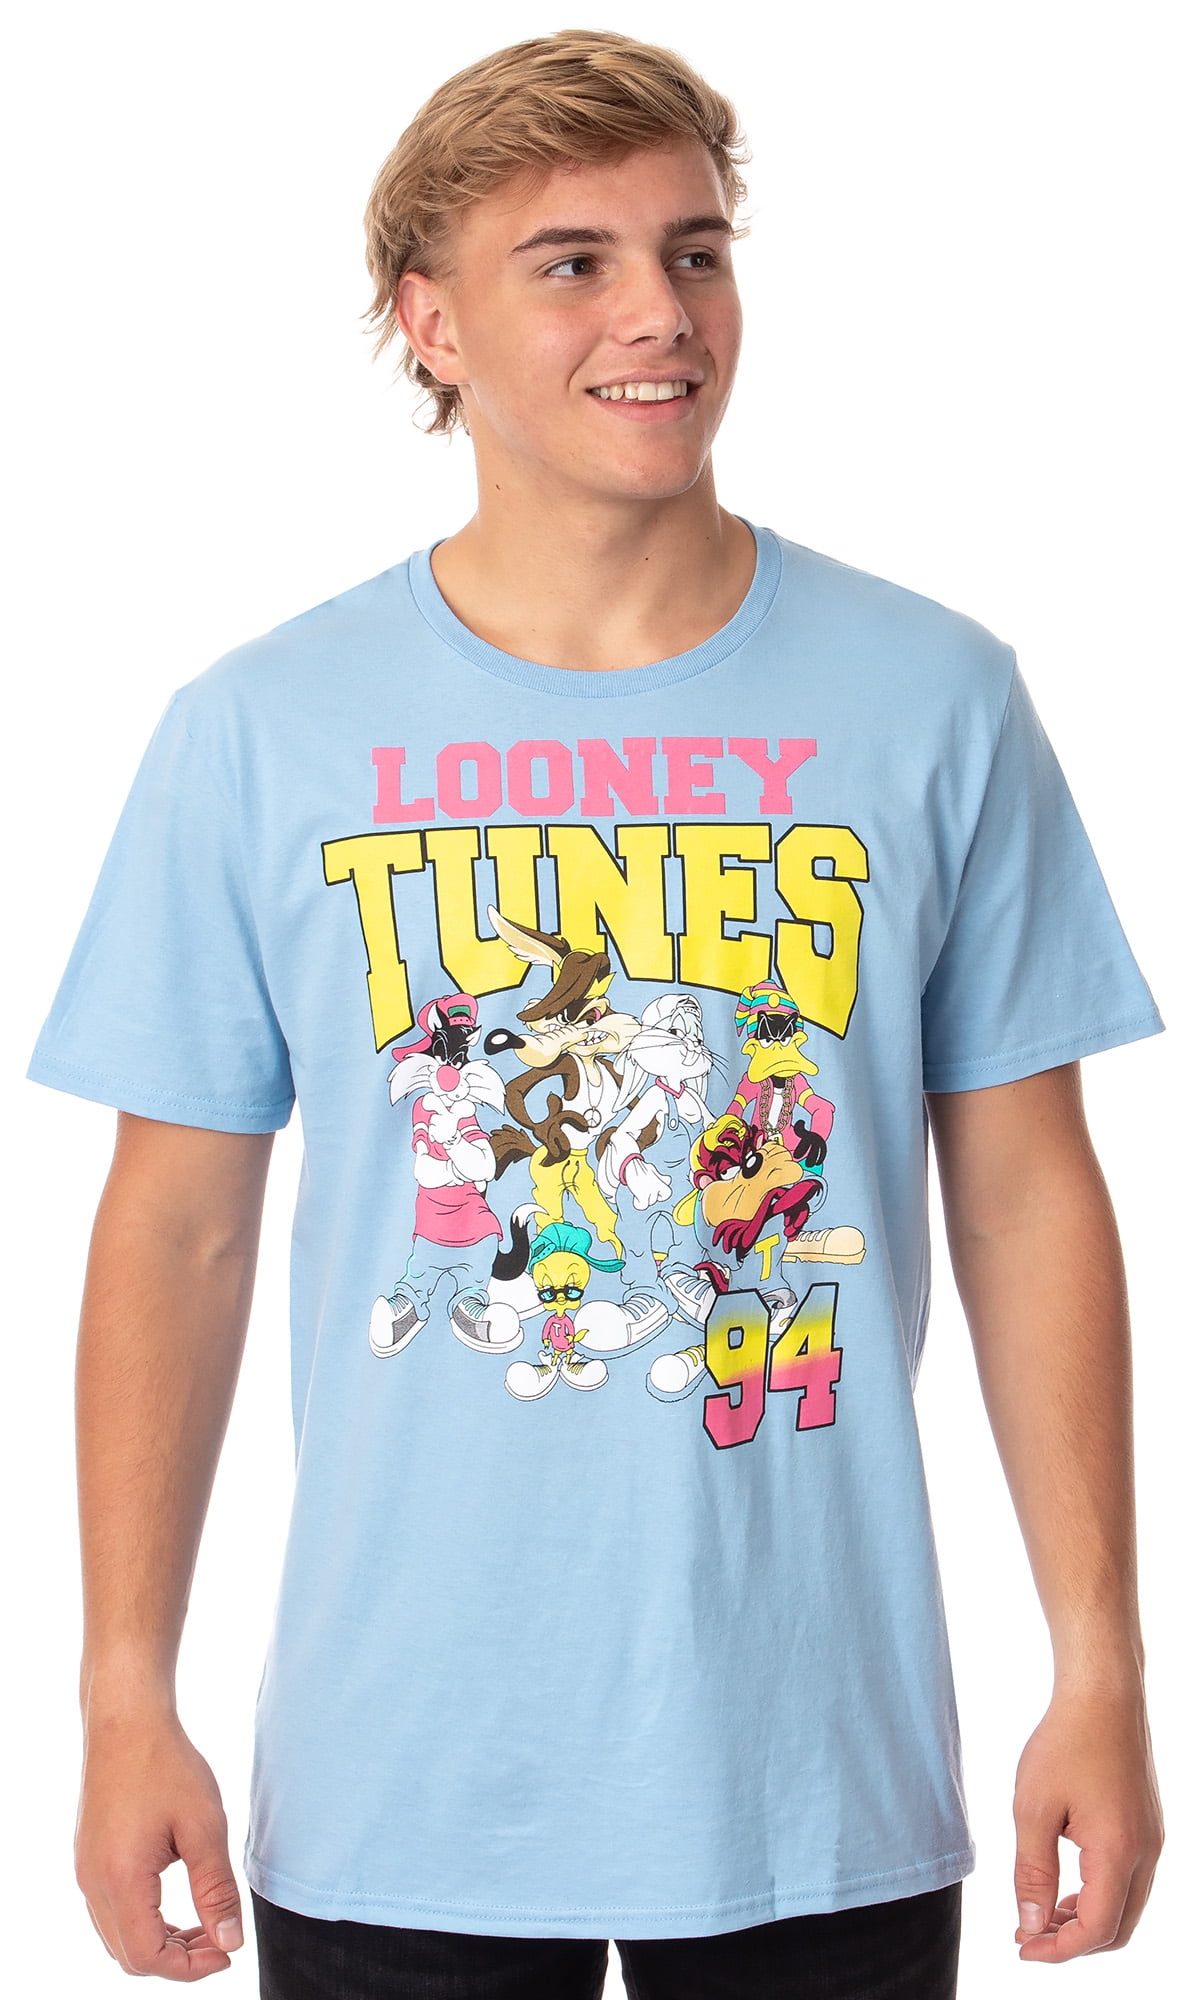 Tunes Characters In 90s Streetwear Graphic Design T-Shirt (3XL) -